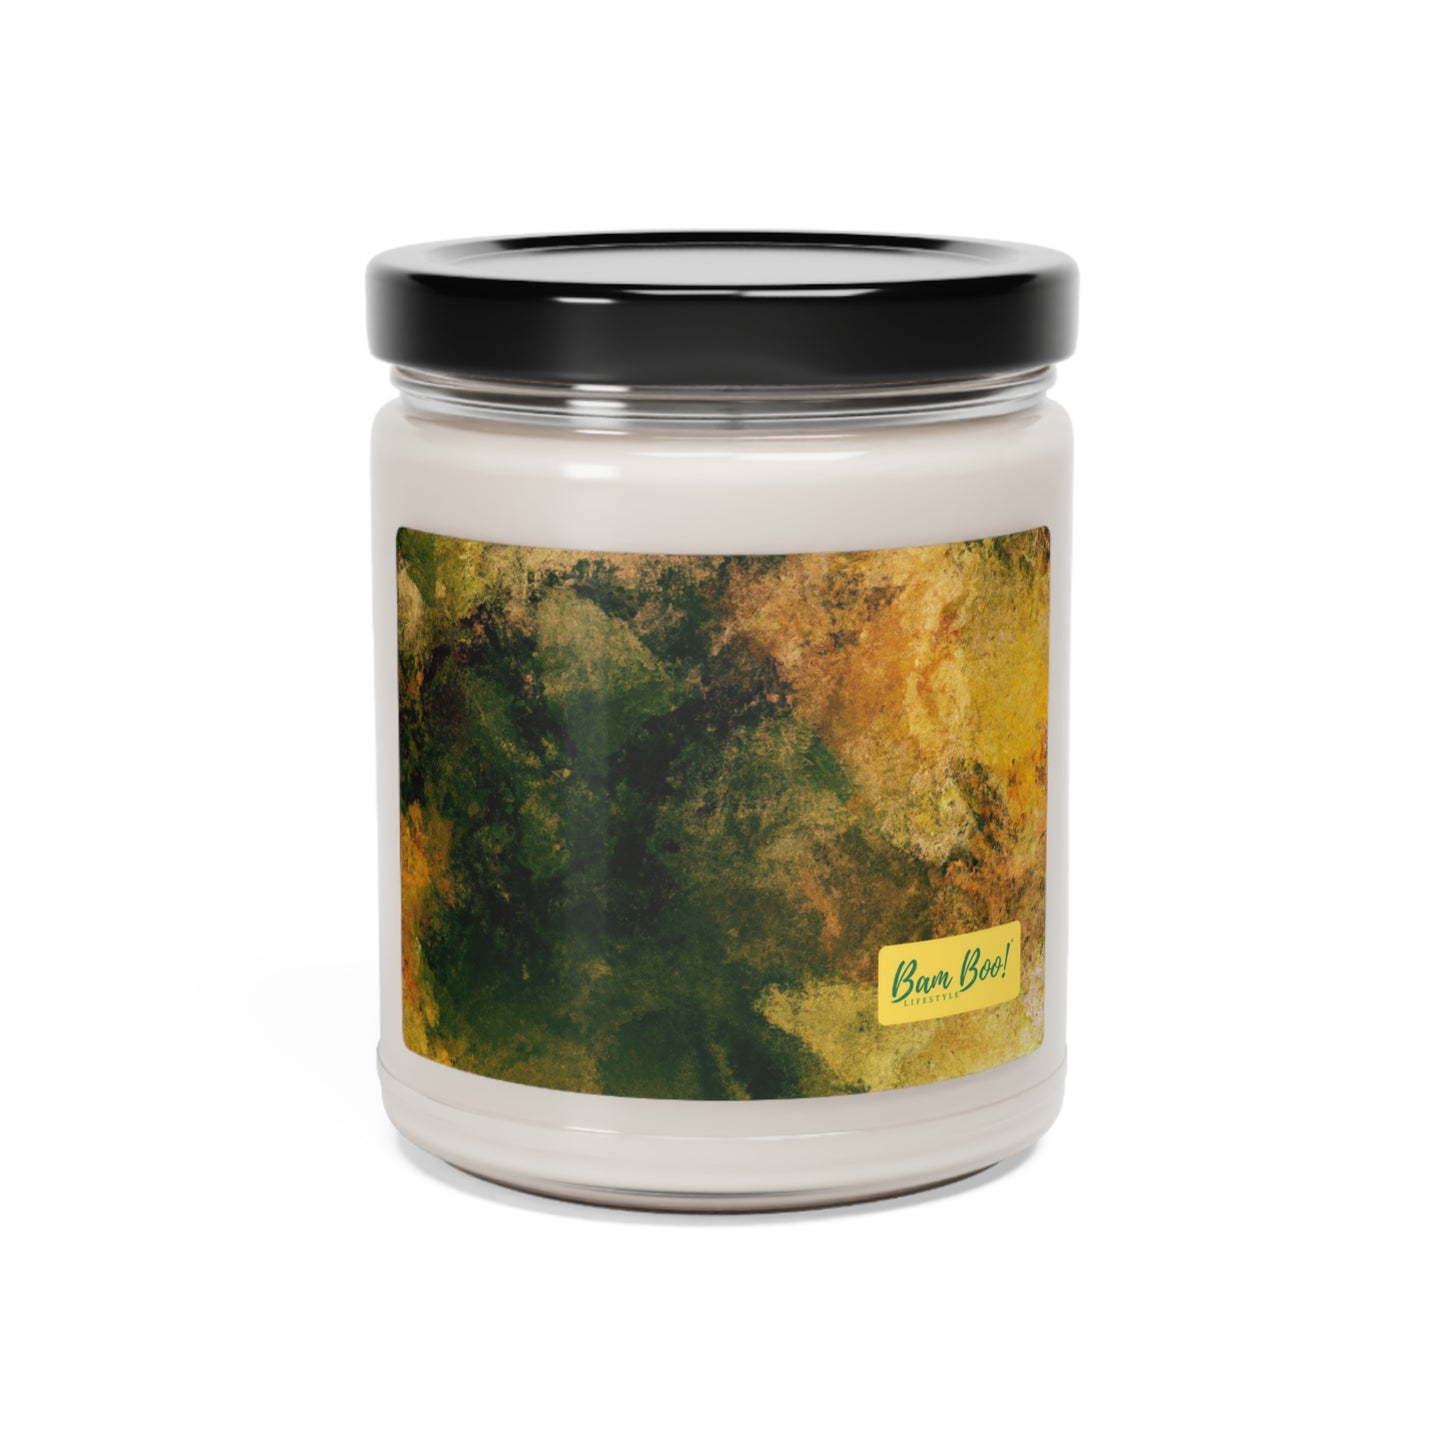 “Nature in Harmony: A Harmonic Abstract Artpiece.” - Bam Boo! Lifestyle Eco-friendly Soy Candle